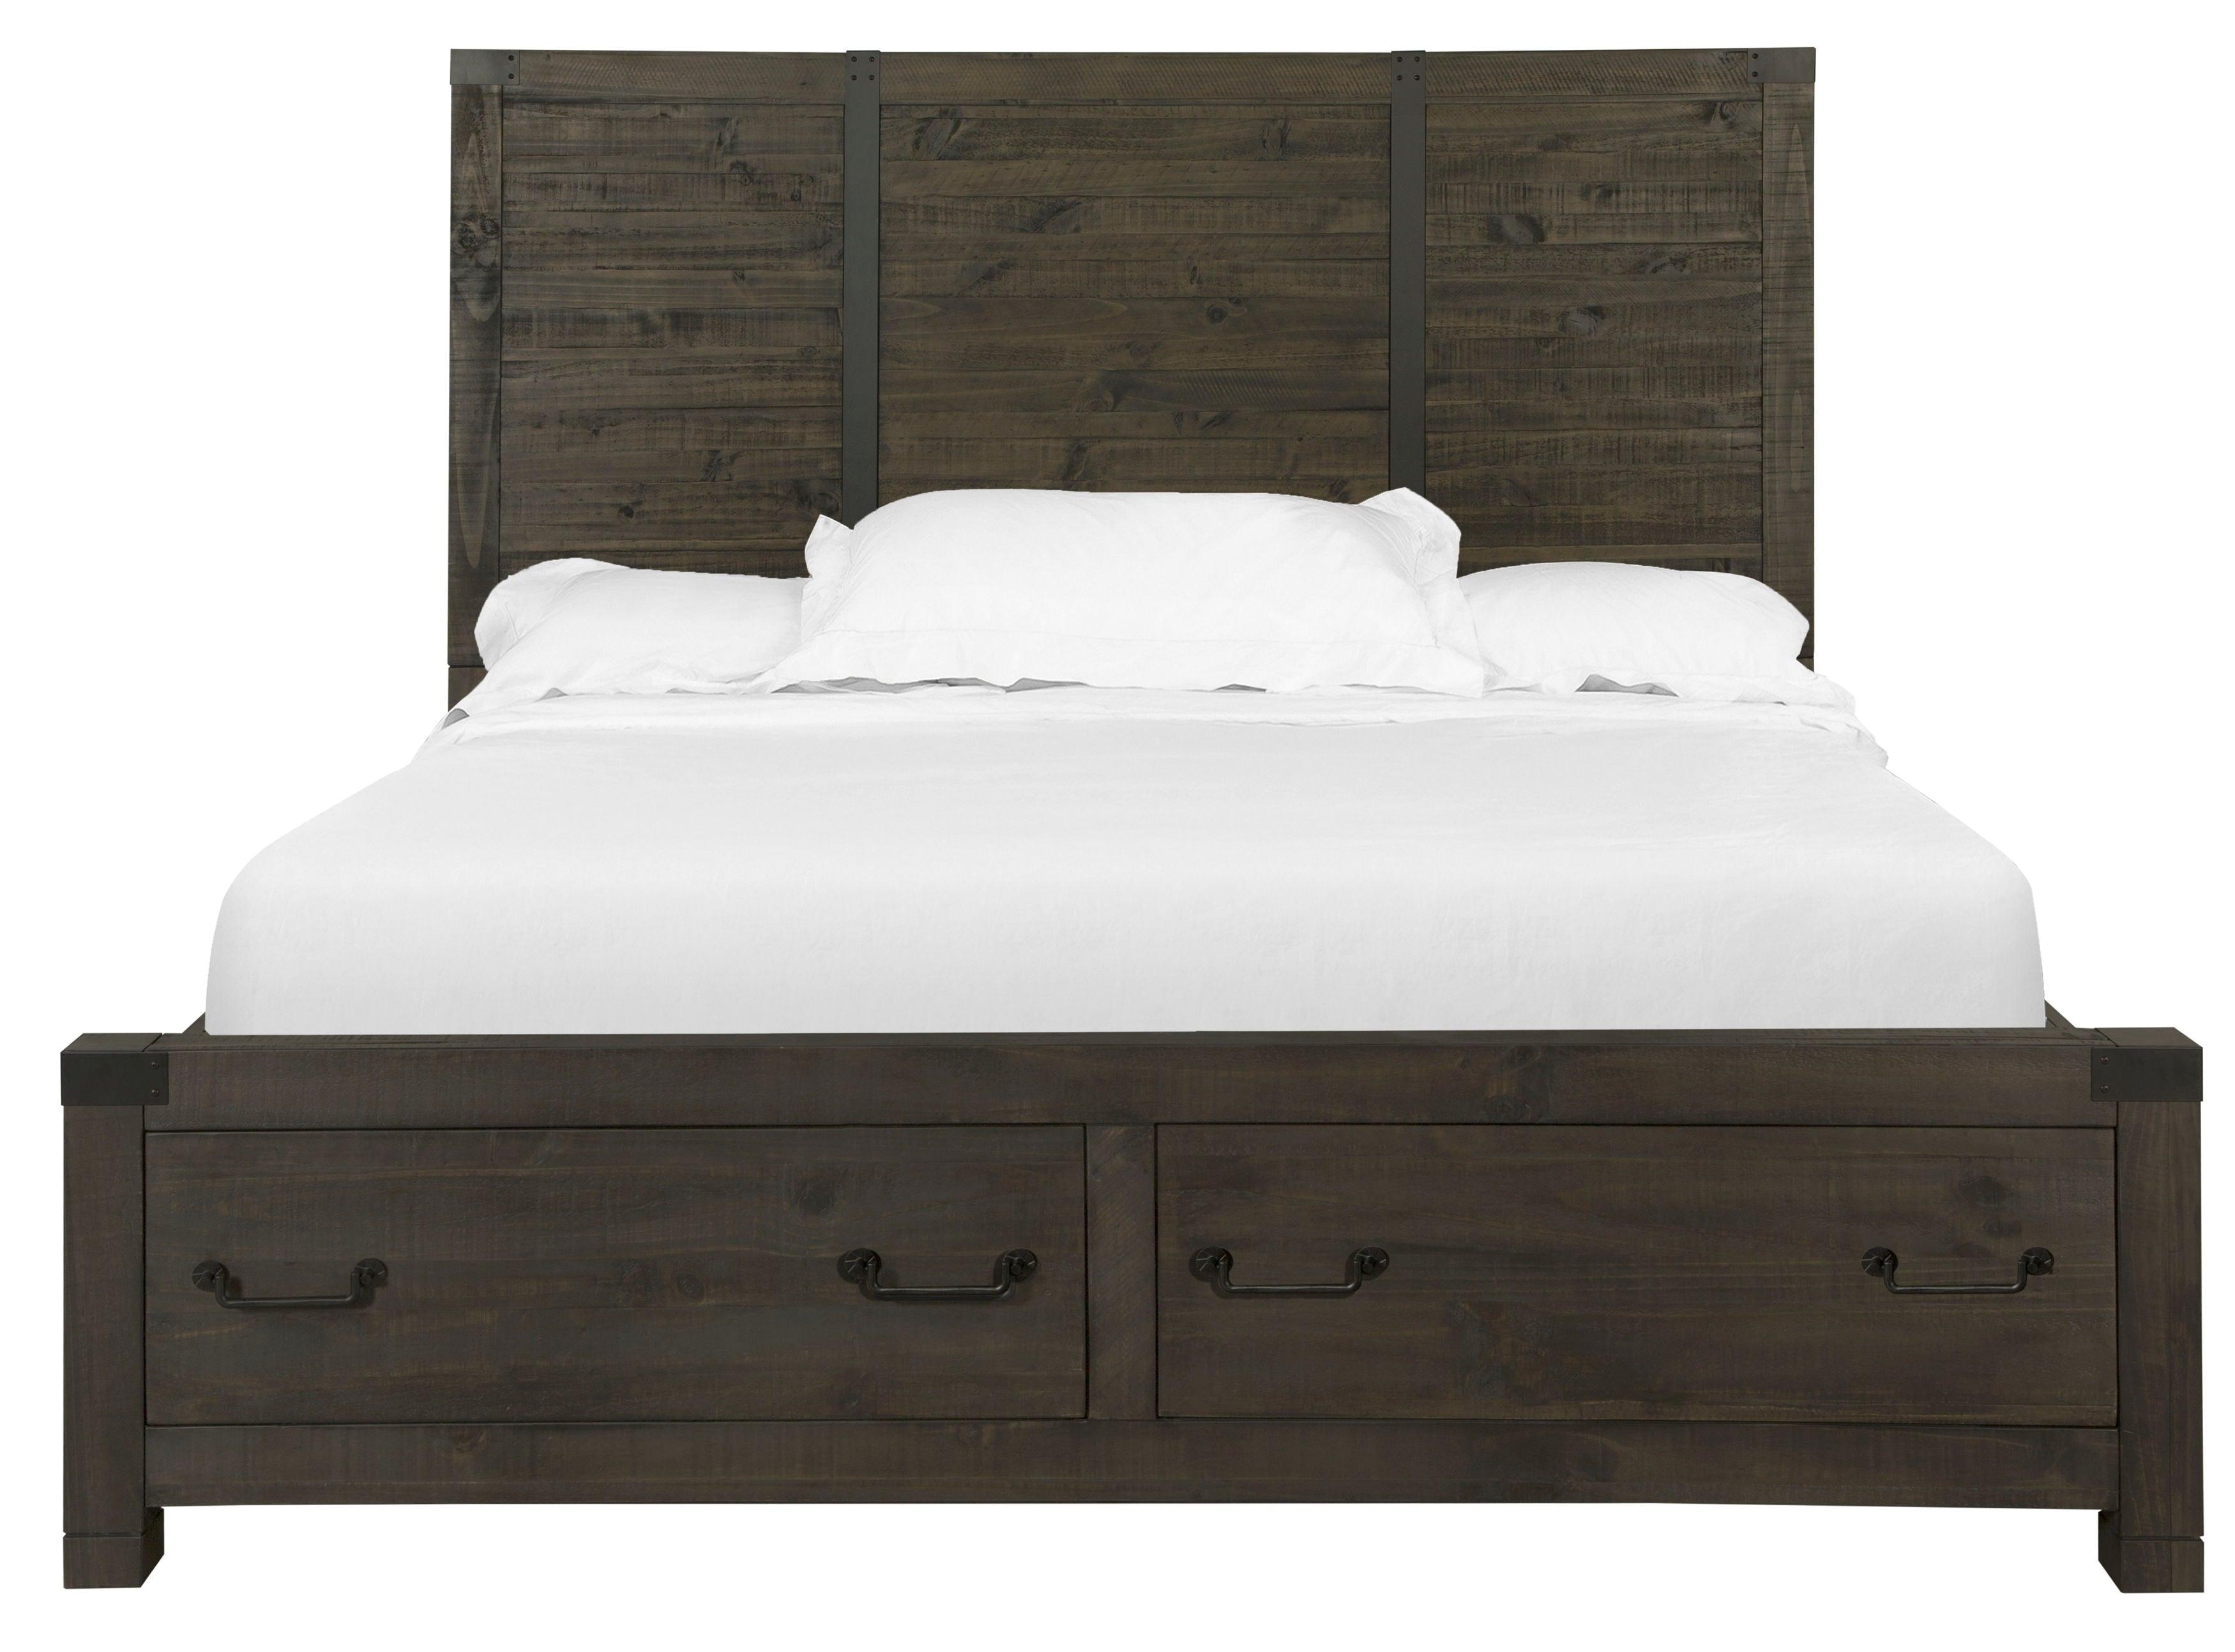 Magnussen Furniture - Abington - Panel Bed With Storage - 5th Avenue Furniture